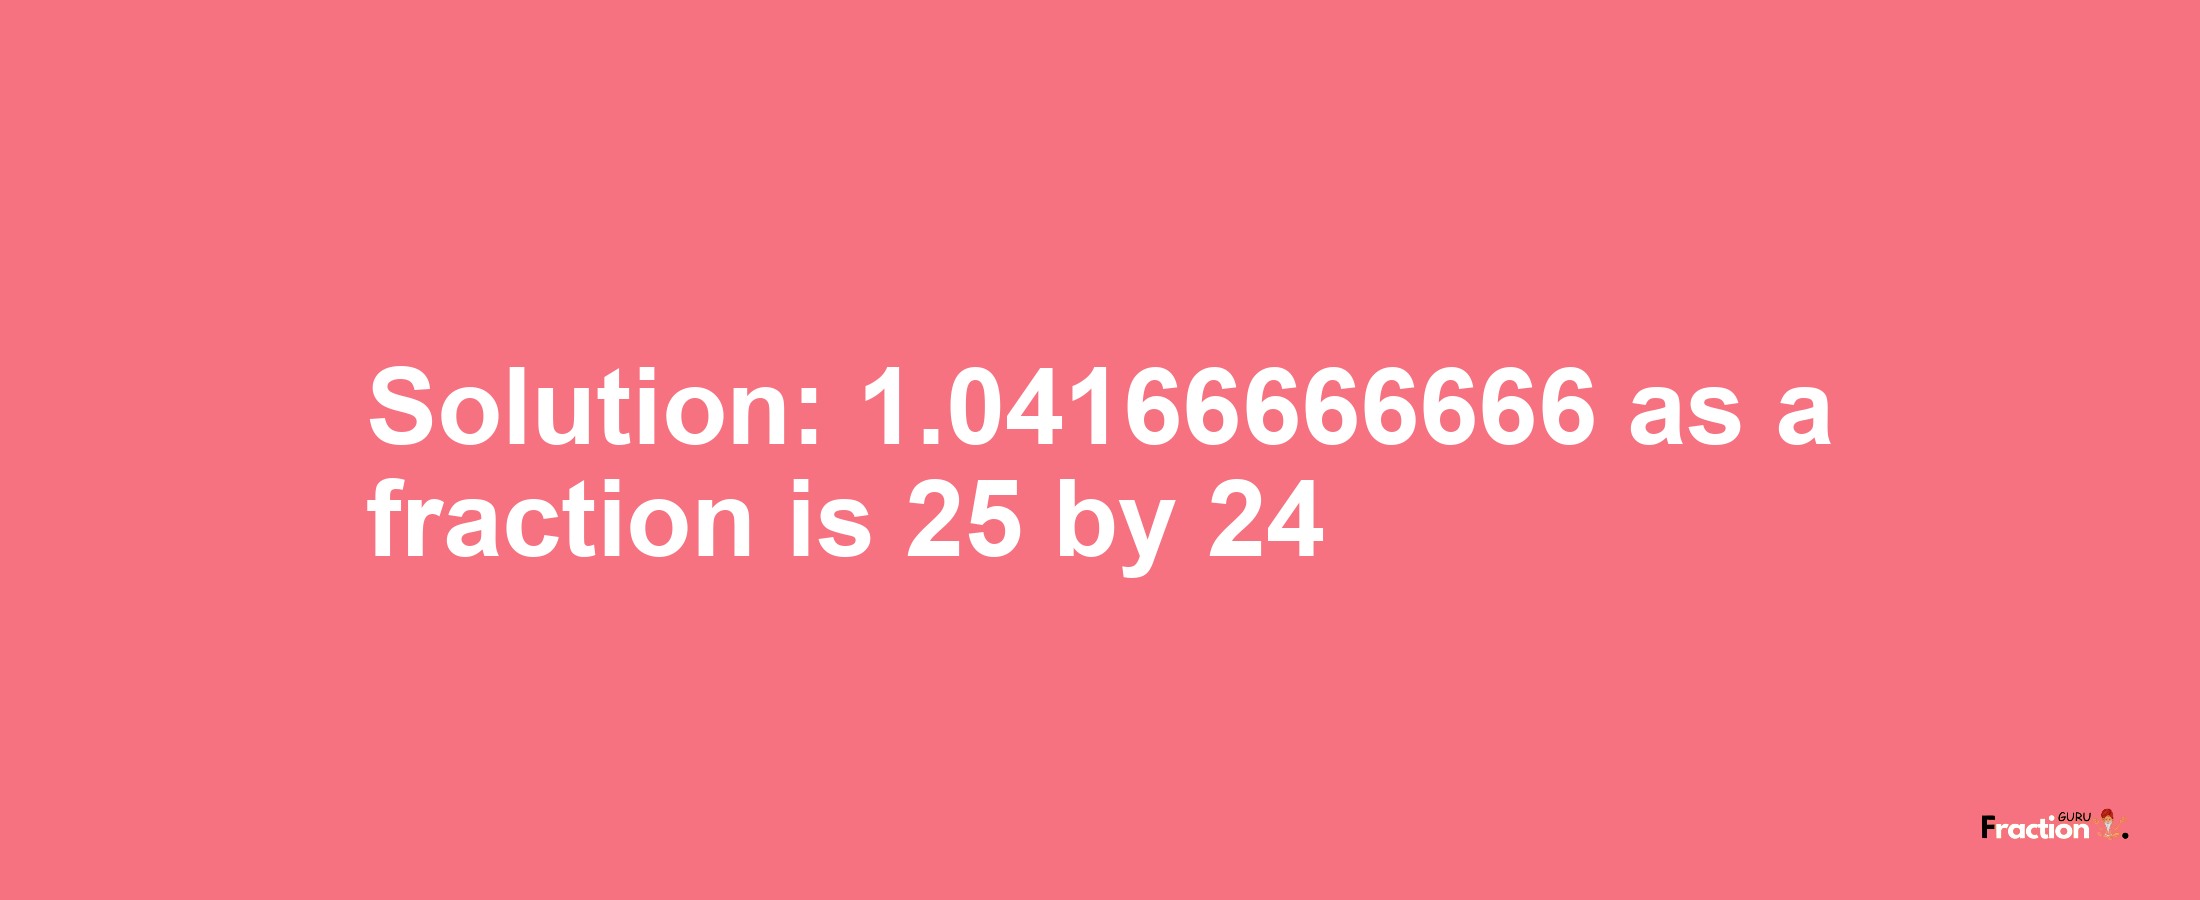 Solution:1.04166666666 as a fraction is 25/24